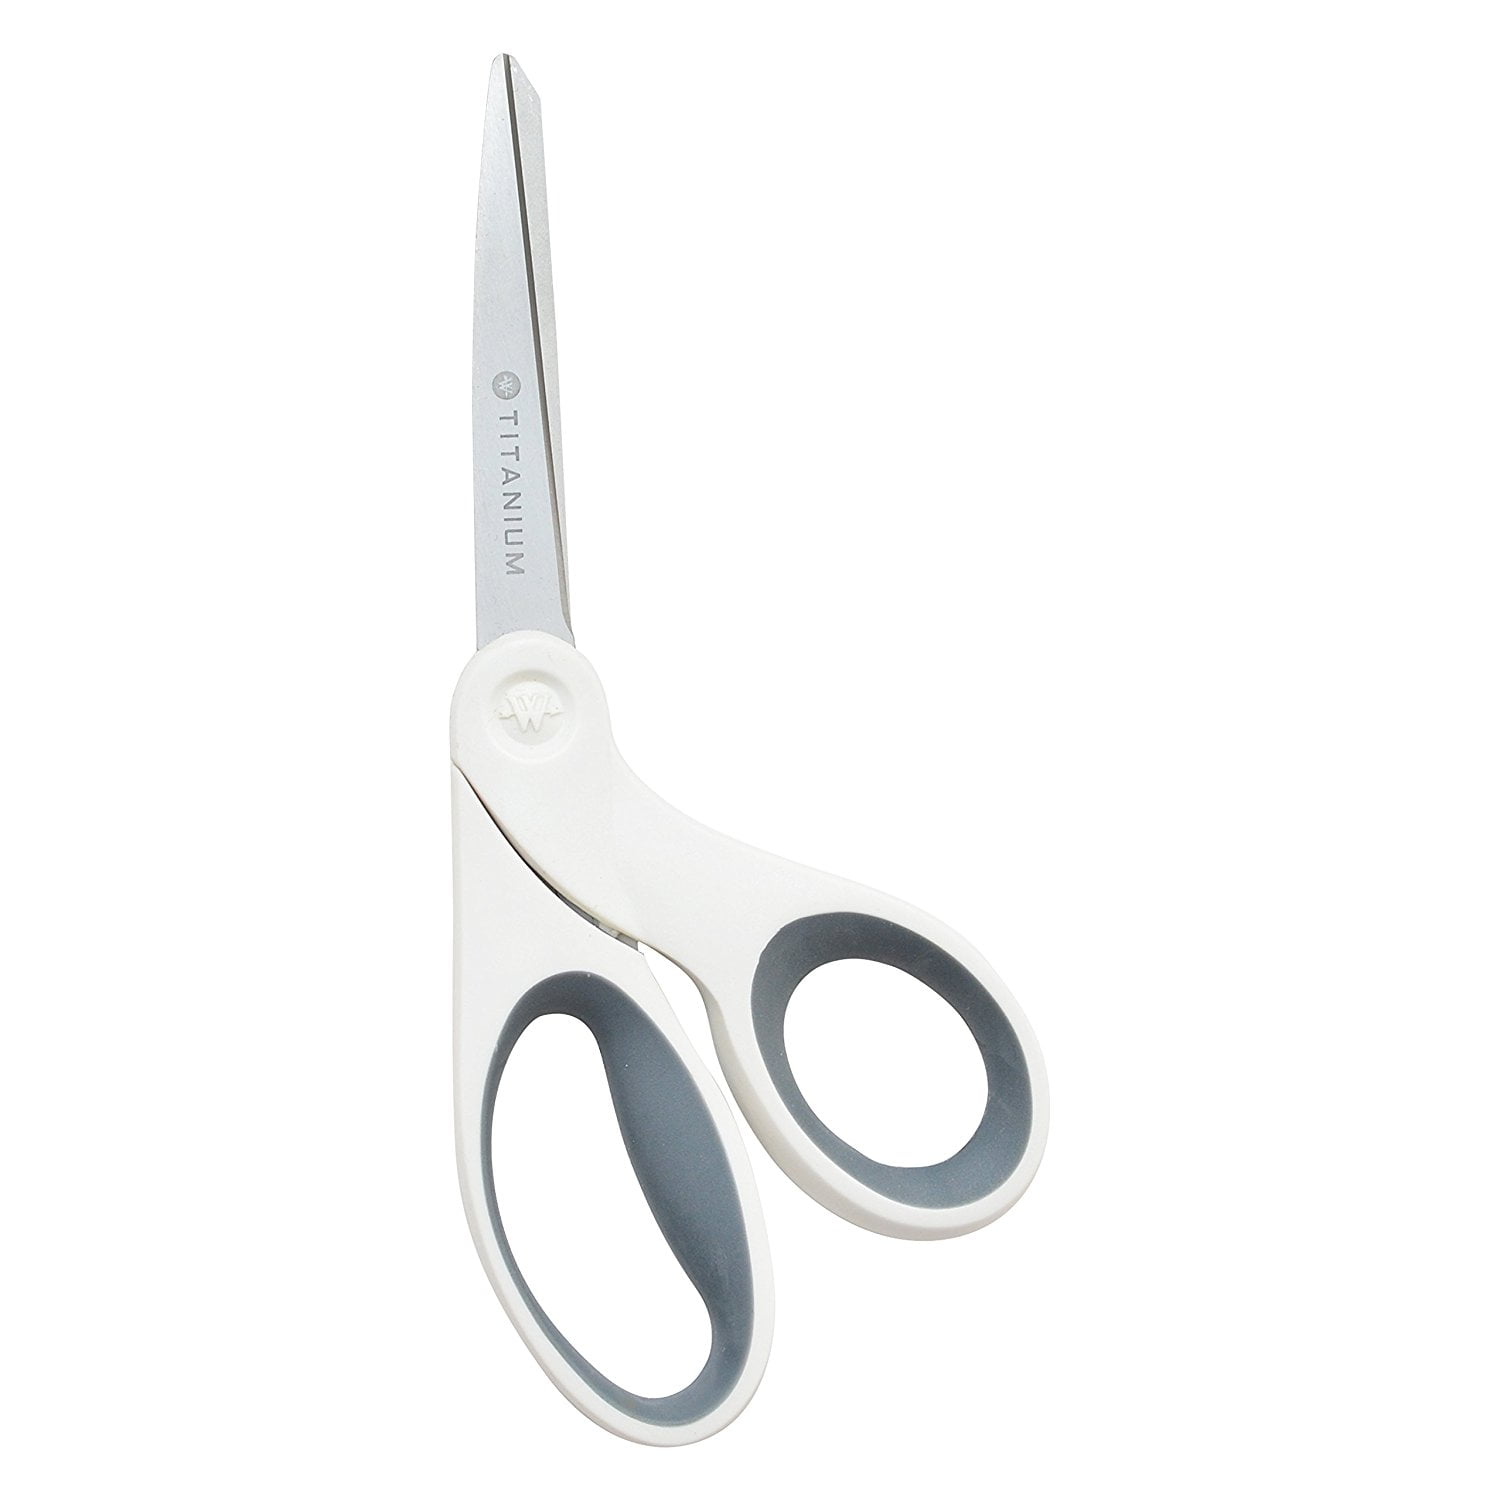 Westcott 16380-001 4 Curved Blade Titanium Embroidery Scissors for  Crafting, White/Gray